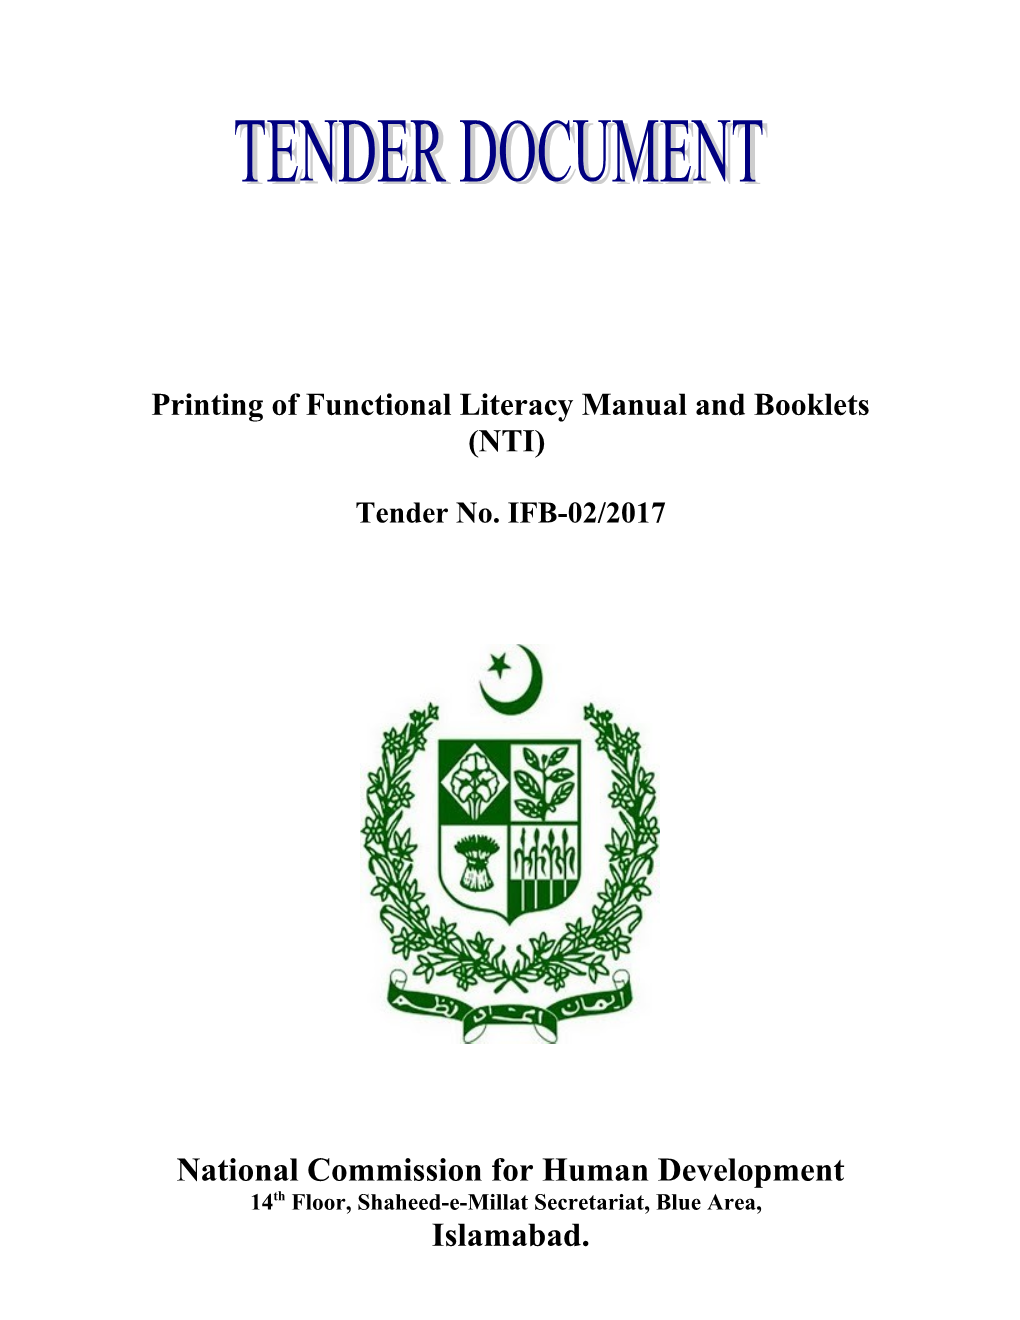 Printing of Functional Literacy Manual and Booklets (NTI)